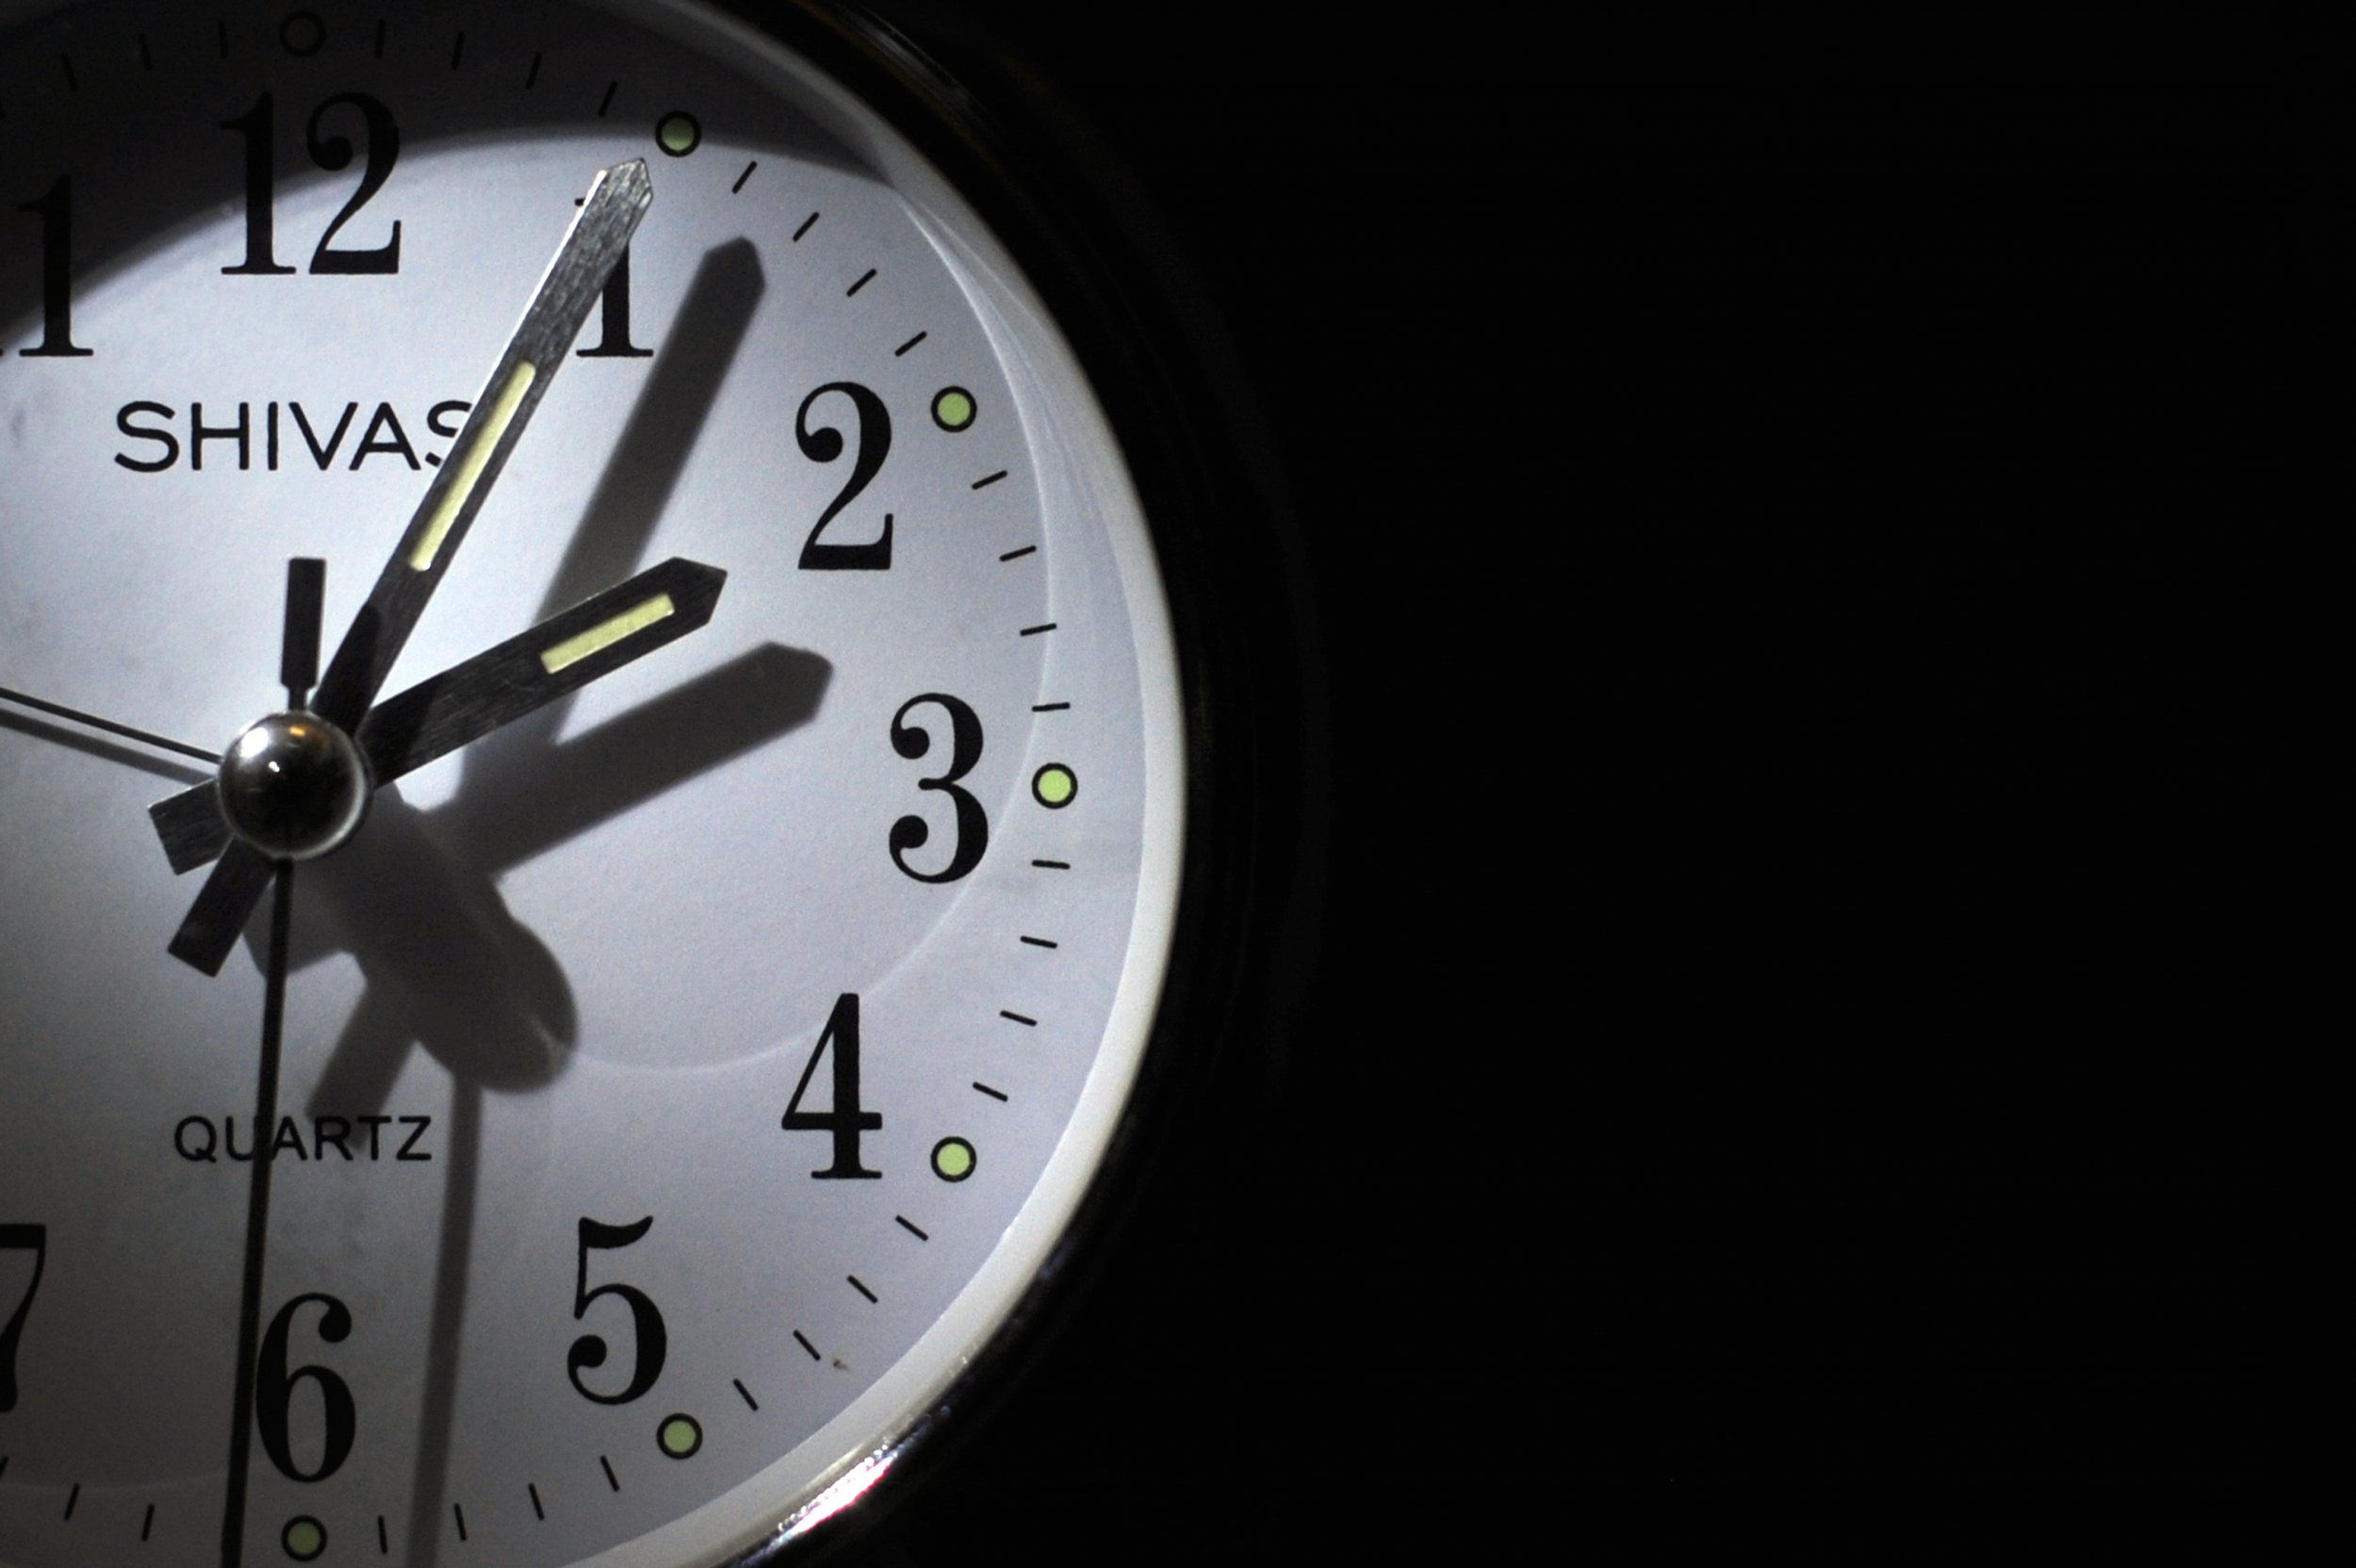 There goes the sun: Daylight Saving Time ending in Israel